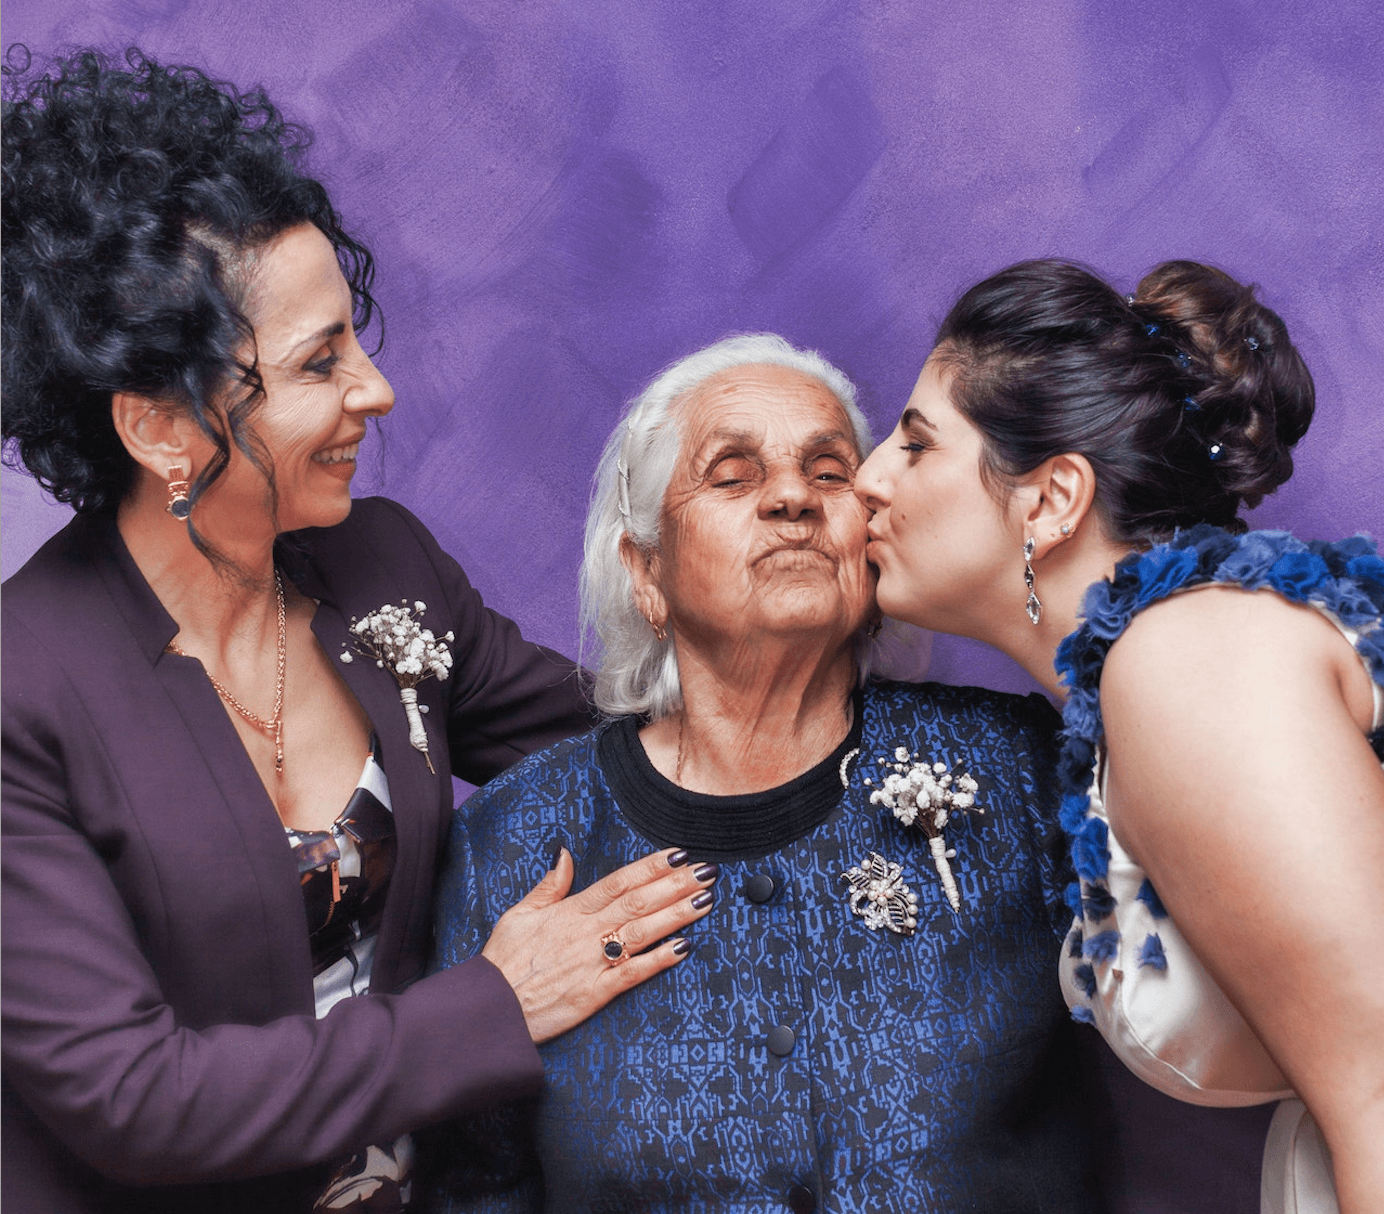 A grandma in blue is flanked by her daughter on the left, in purple, and her granddaughter on the right, who kisses her cheek.